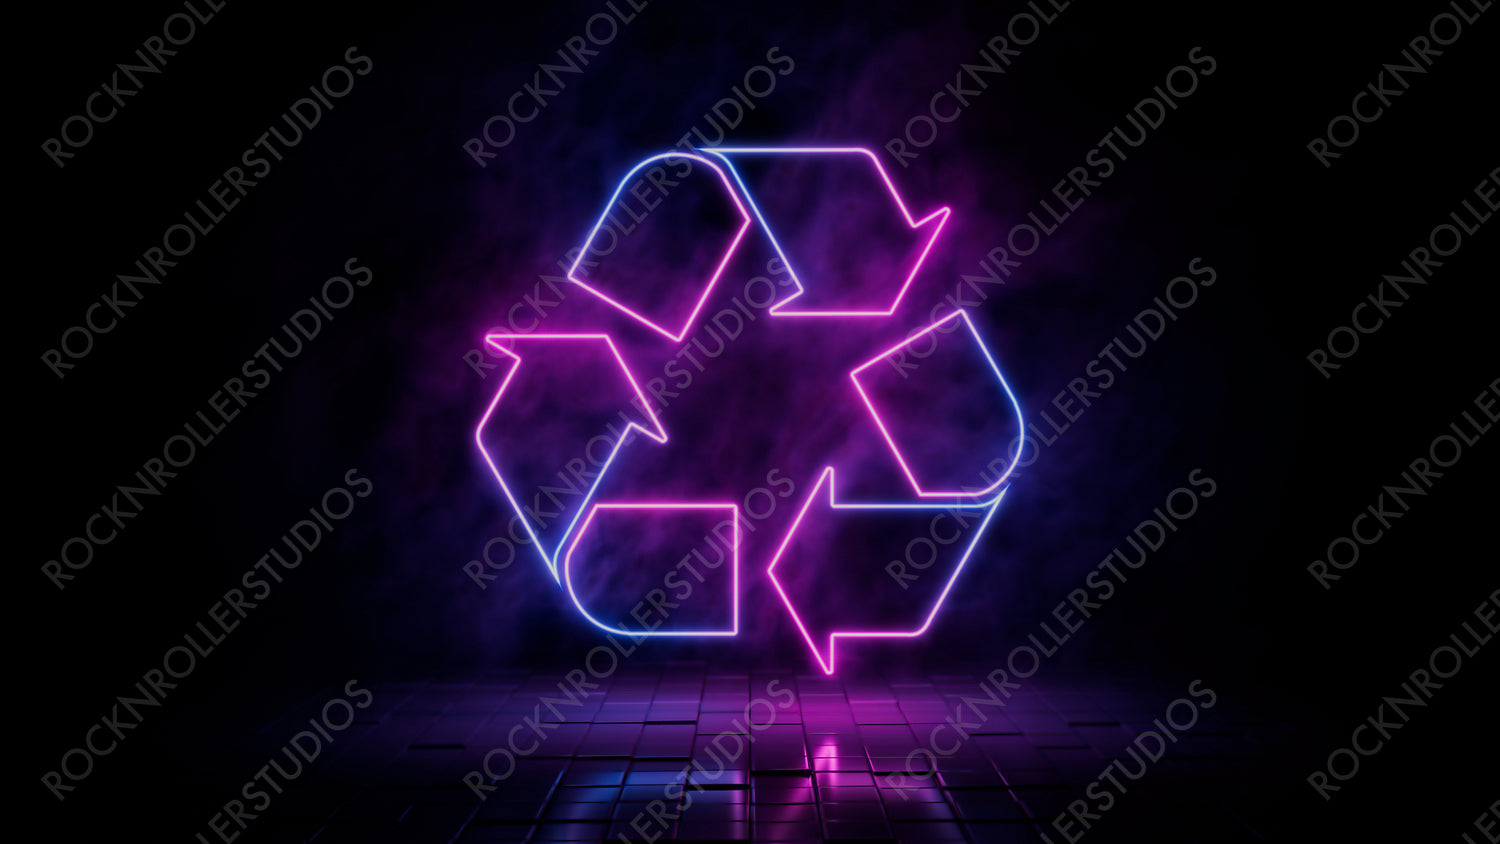 Pink and blue neon light recycle icon. Vibrant colored eco technology symbol, isolated on a black background. 3D Render